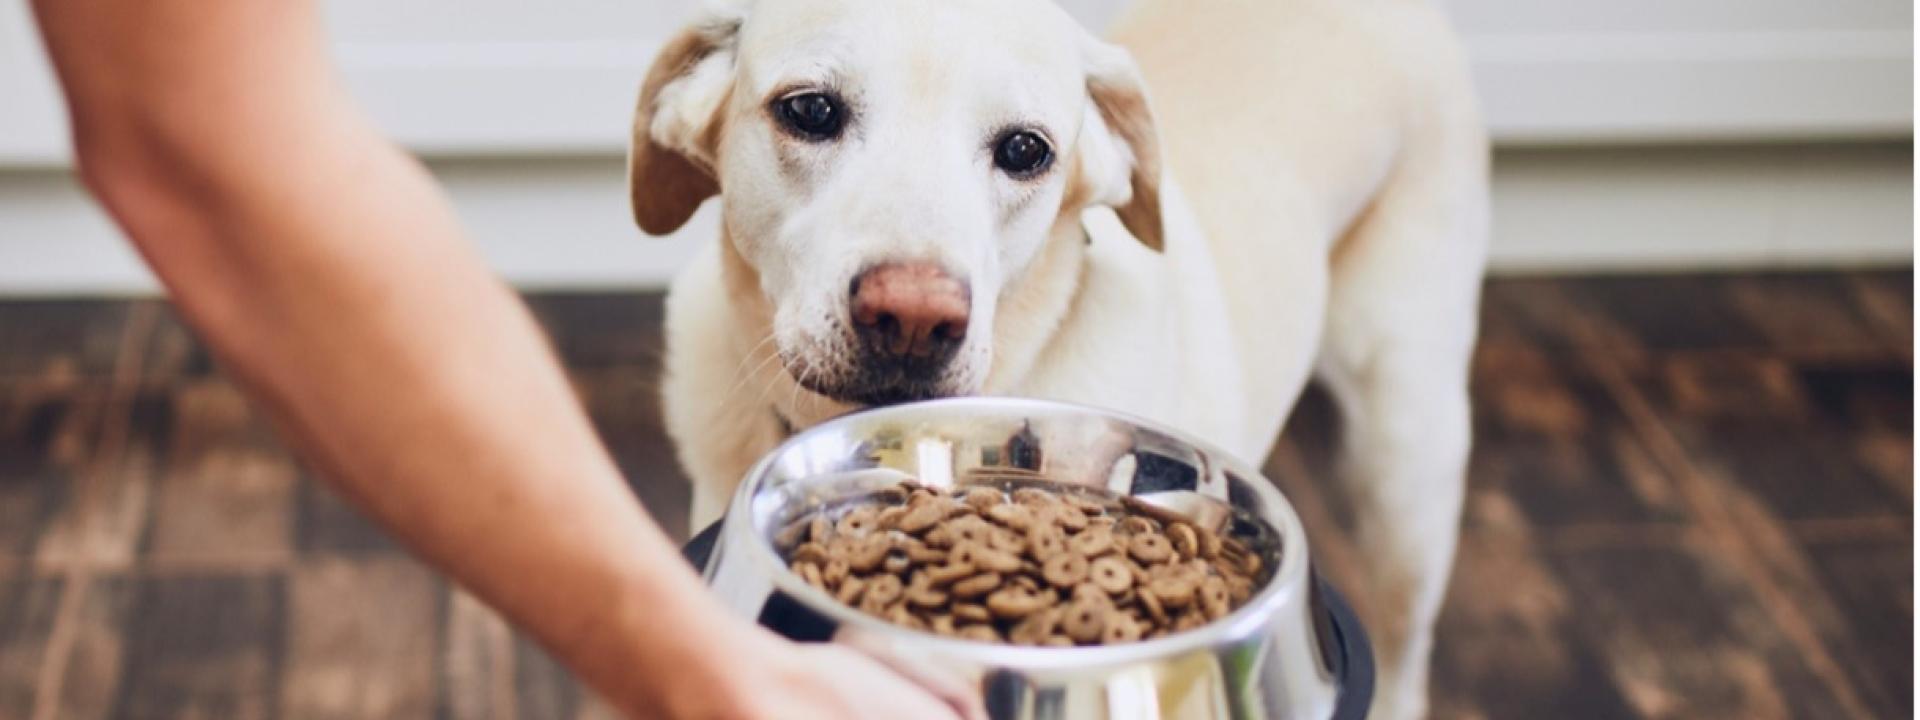 A dog looking at food in a bowl, 5 Factors to Consider When Choosing the Right Pet Food